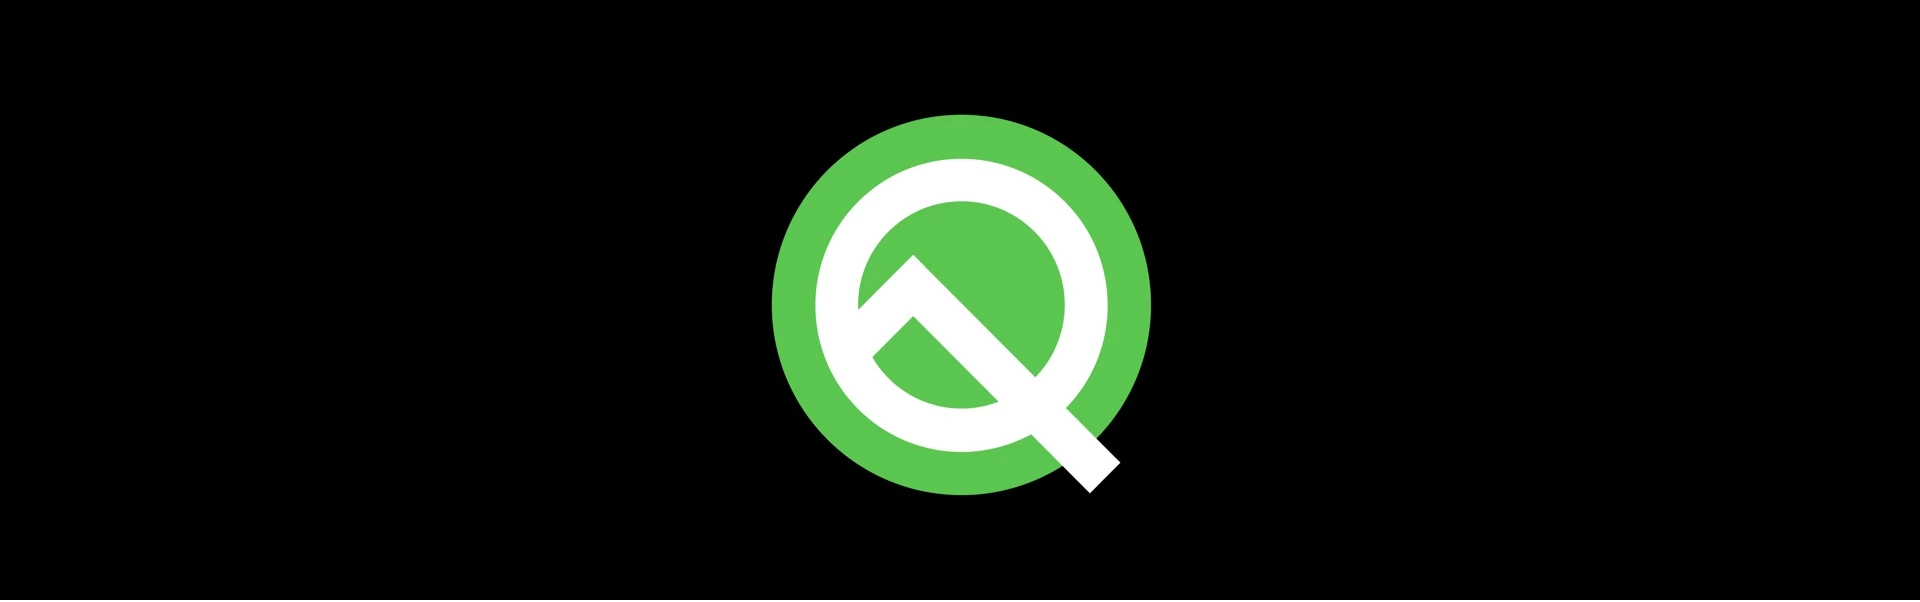 Android Q Features: What’s New in Display and Under Hood?